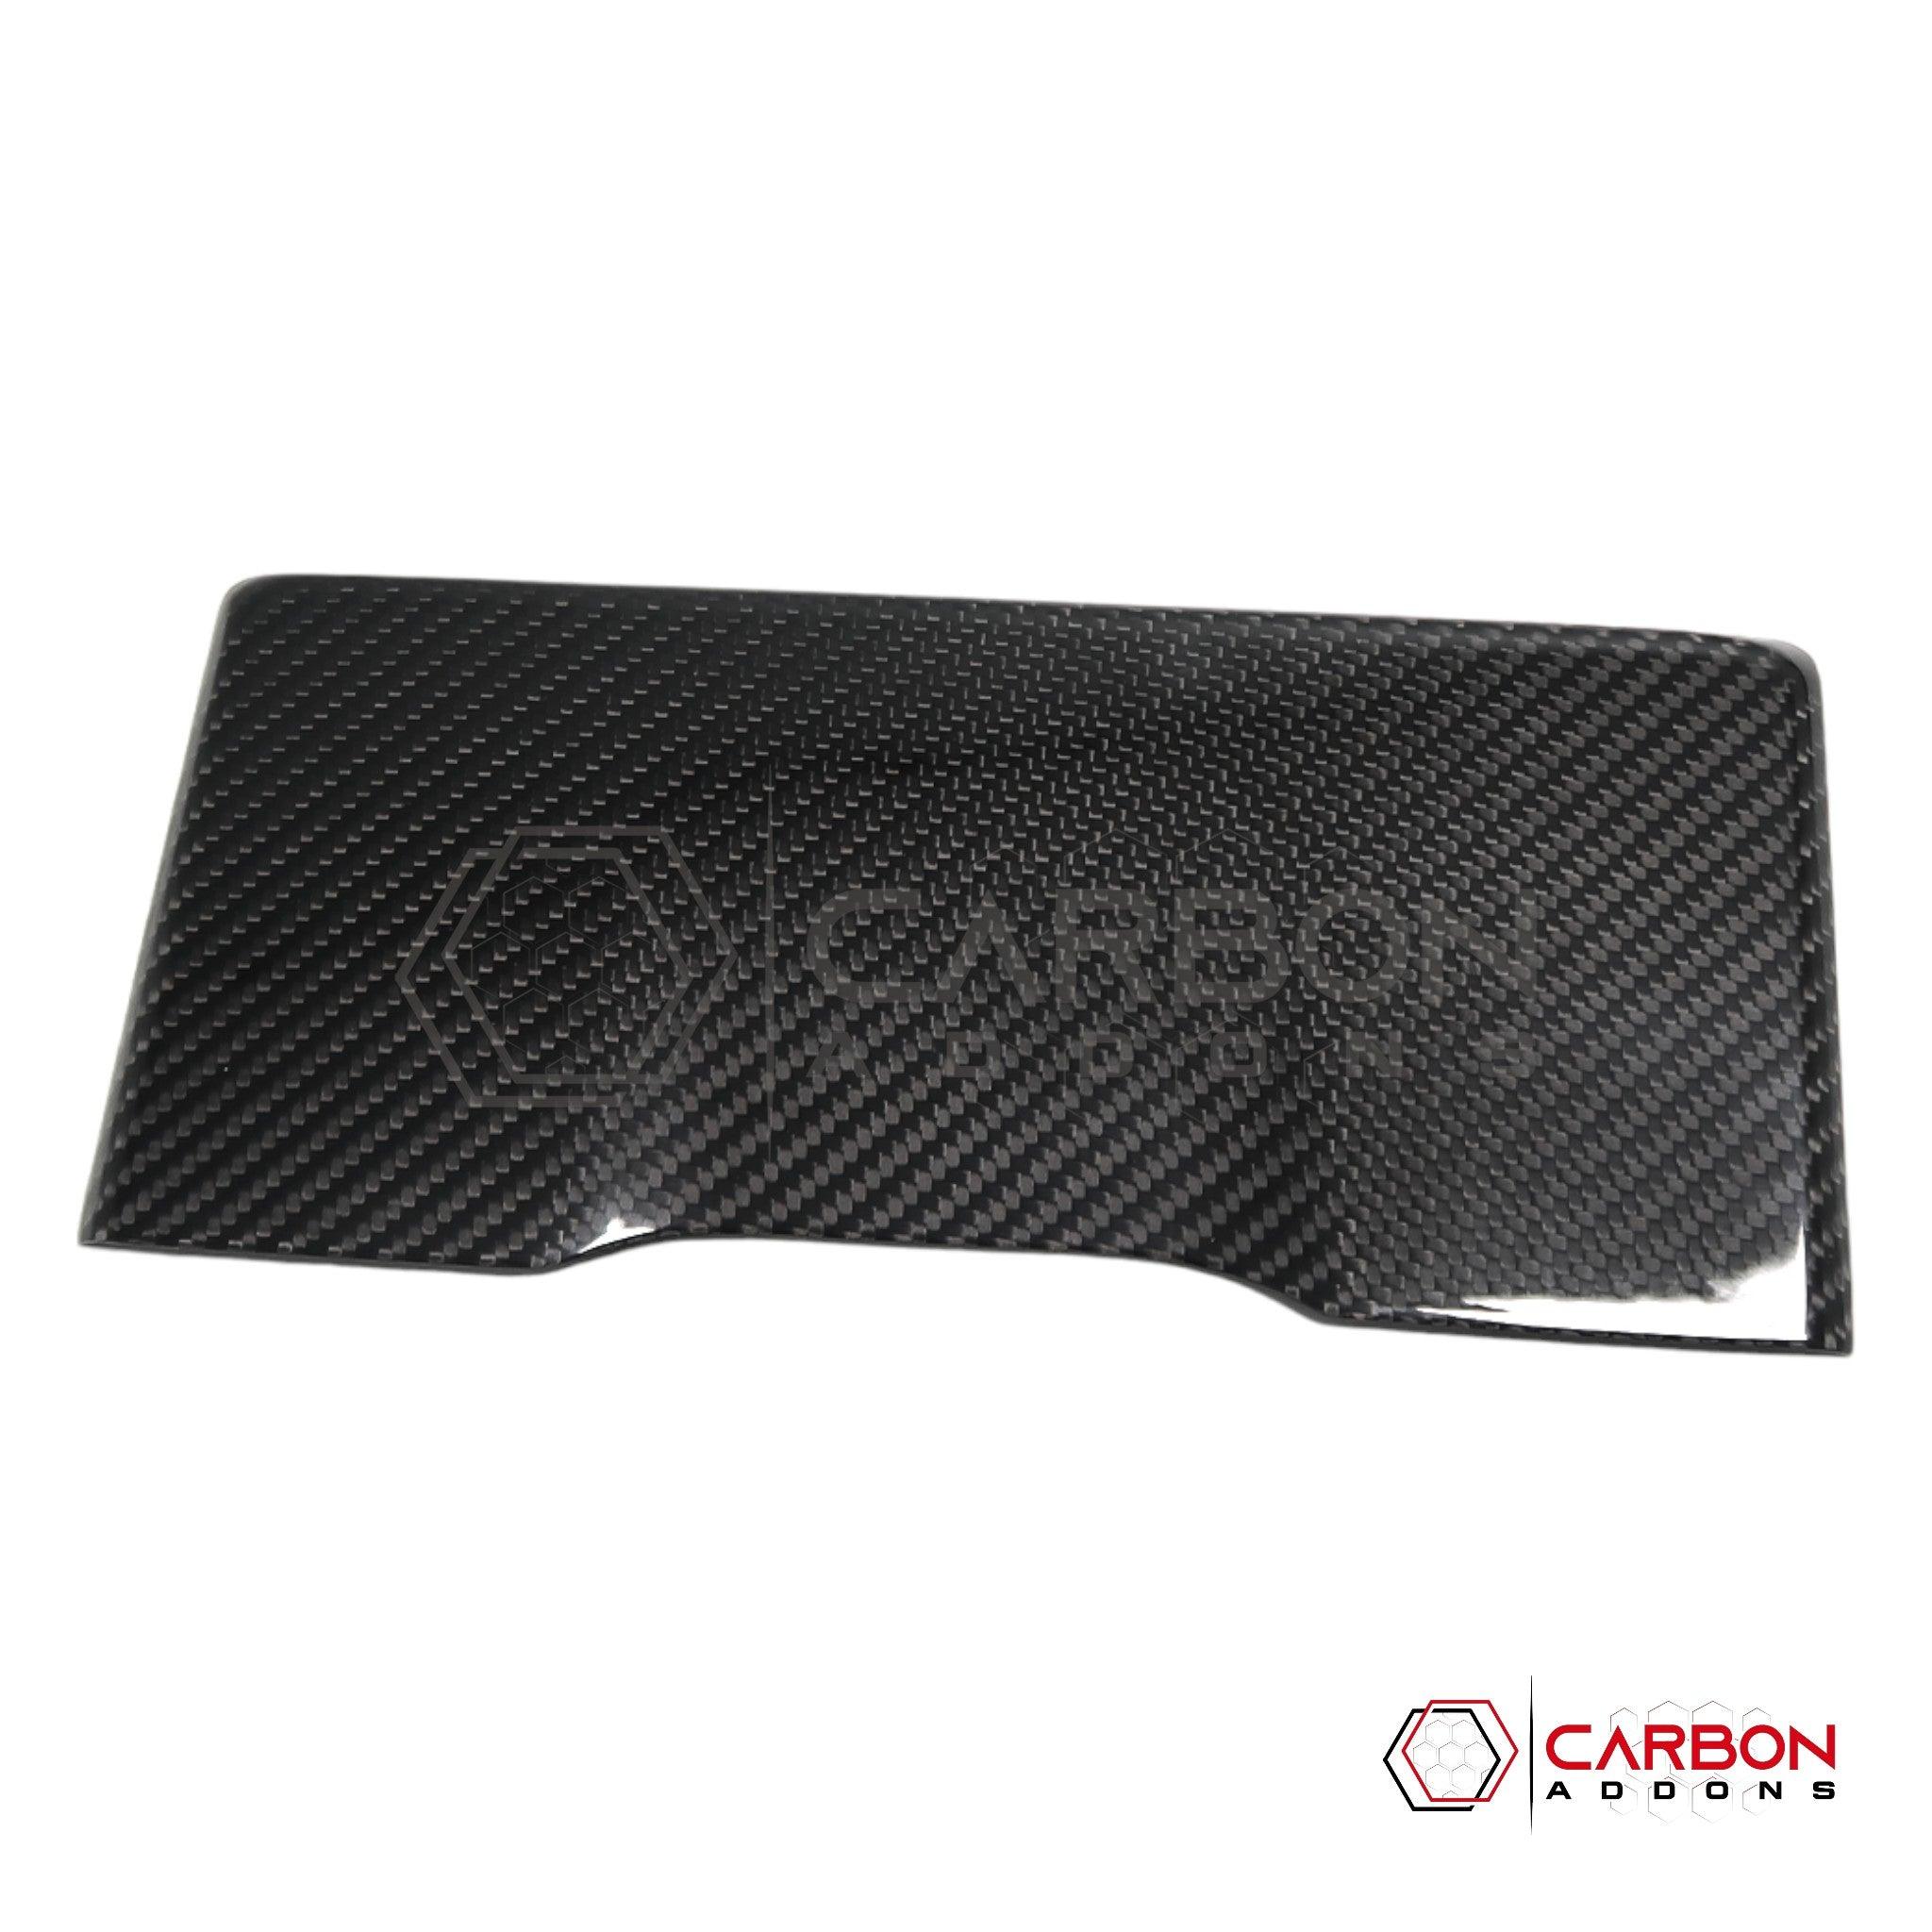 [Coming Soon] RAM TRX 2021-2024 Cup Holder Cover Hard Carbon Fiber Cover - carbonaddons Carbon Fiber Parts, Accessories, Upgrades, Mods